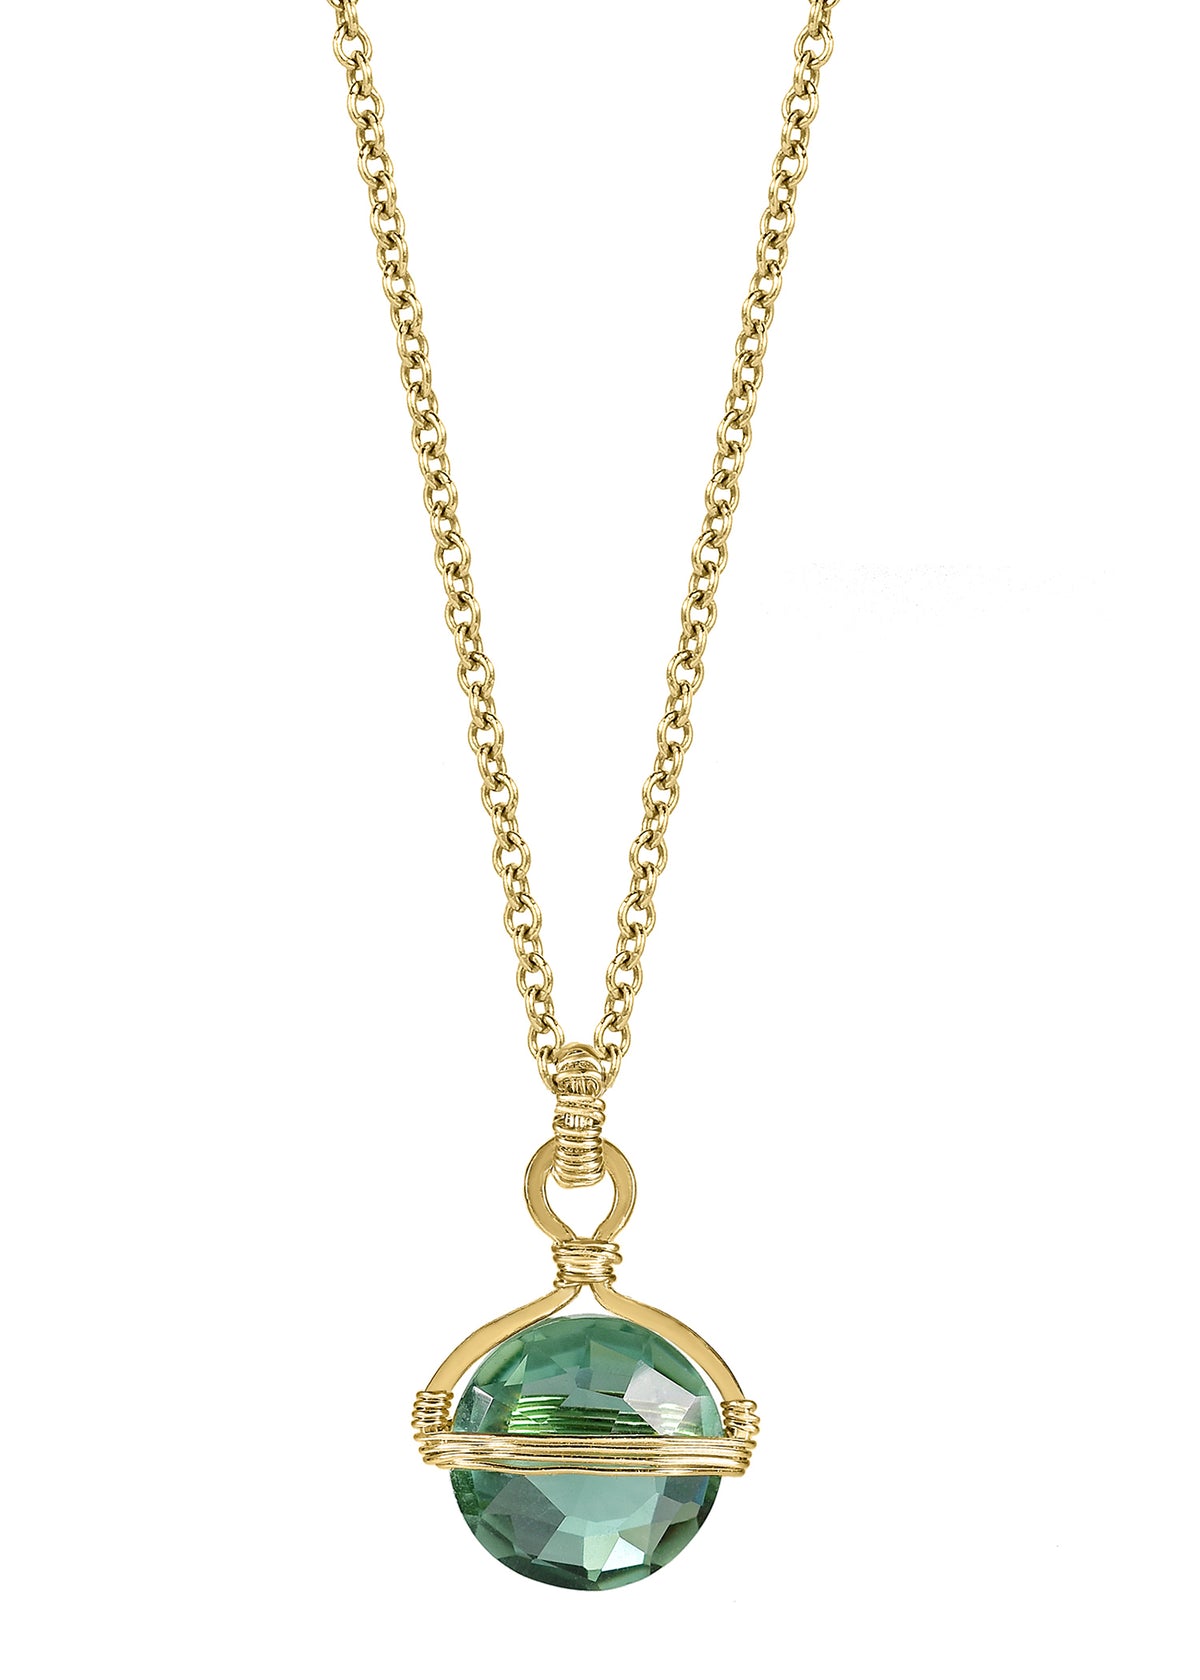 Green quartz 14k gold fill Necklace measures 16&quot; in length Pendant measures 9/16&quot; in length and 3/8&quot; in width Handmade in our Los Angeles studio